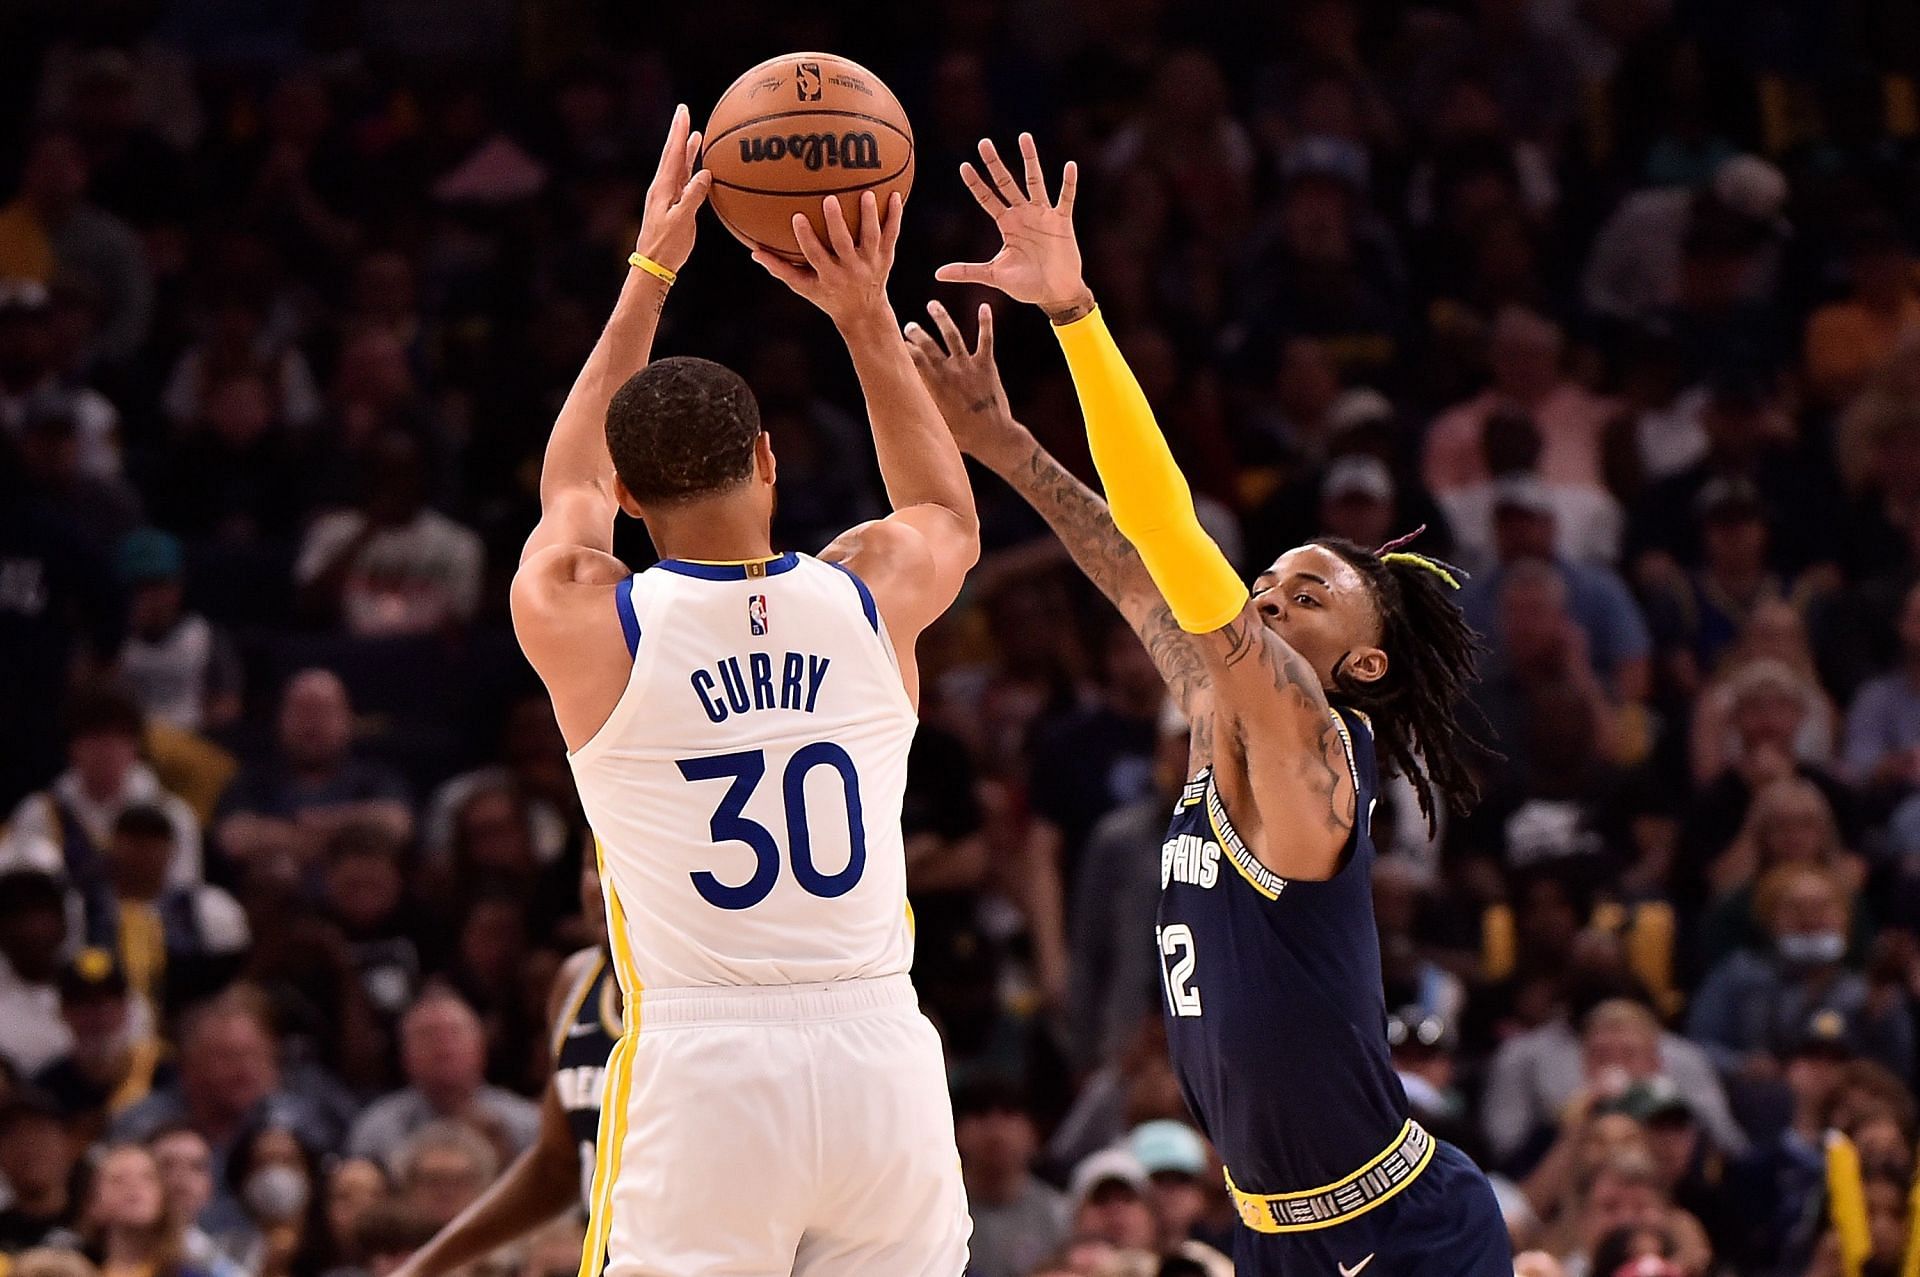 Steph Curry of the Golden State Warriors and Ja Morant of the Grizzlies